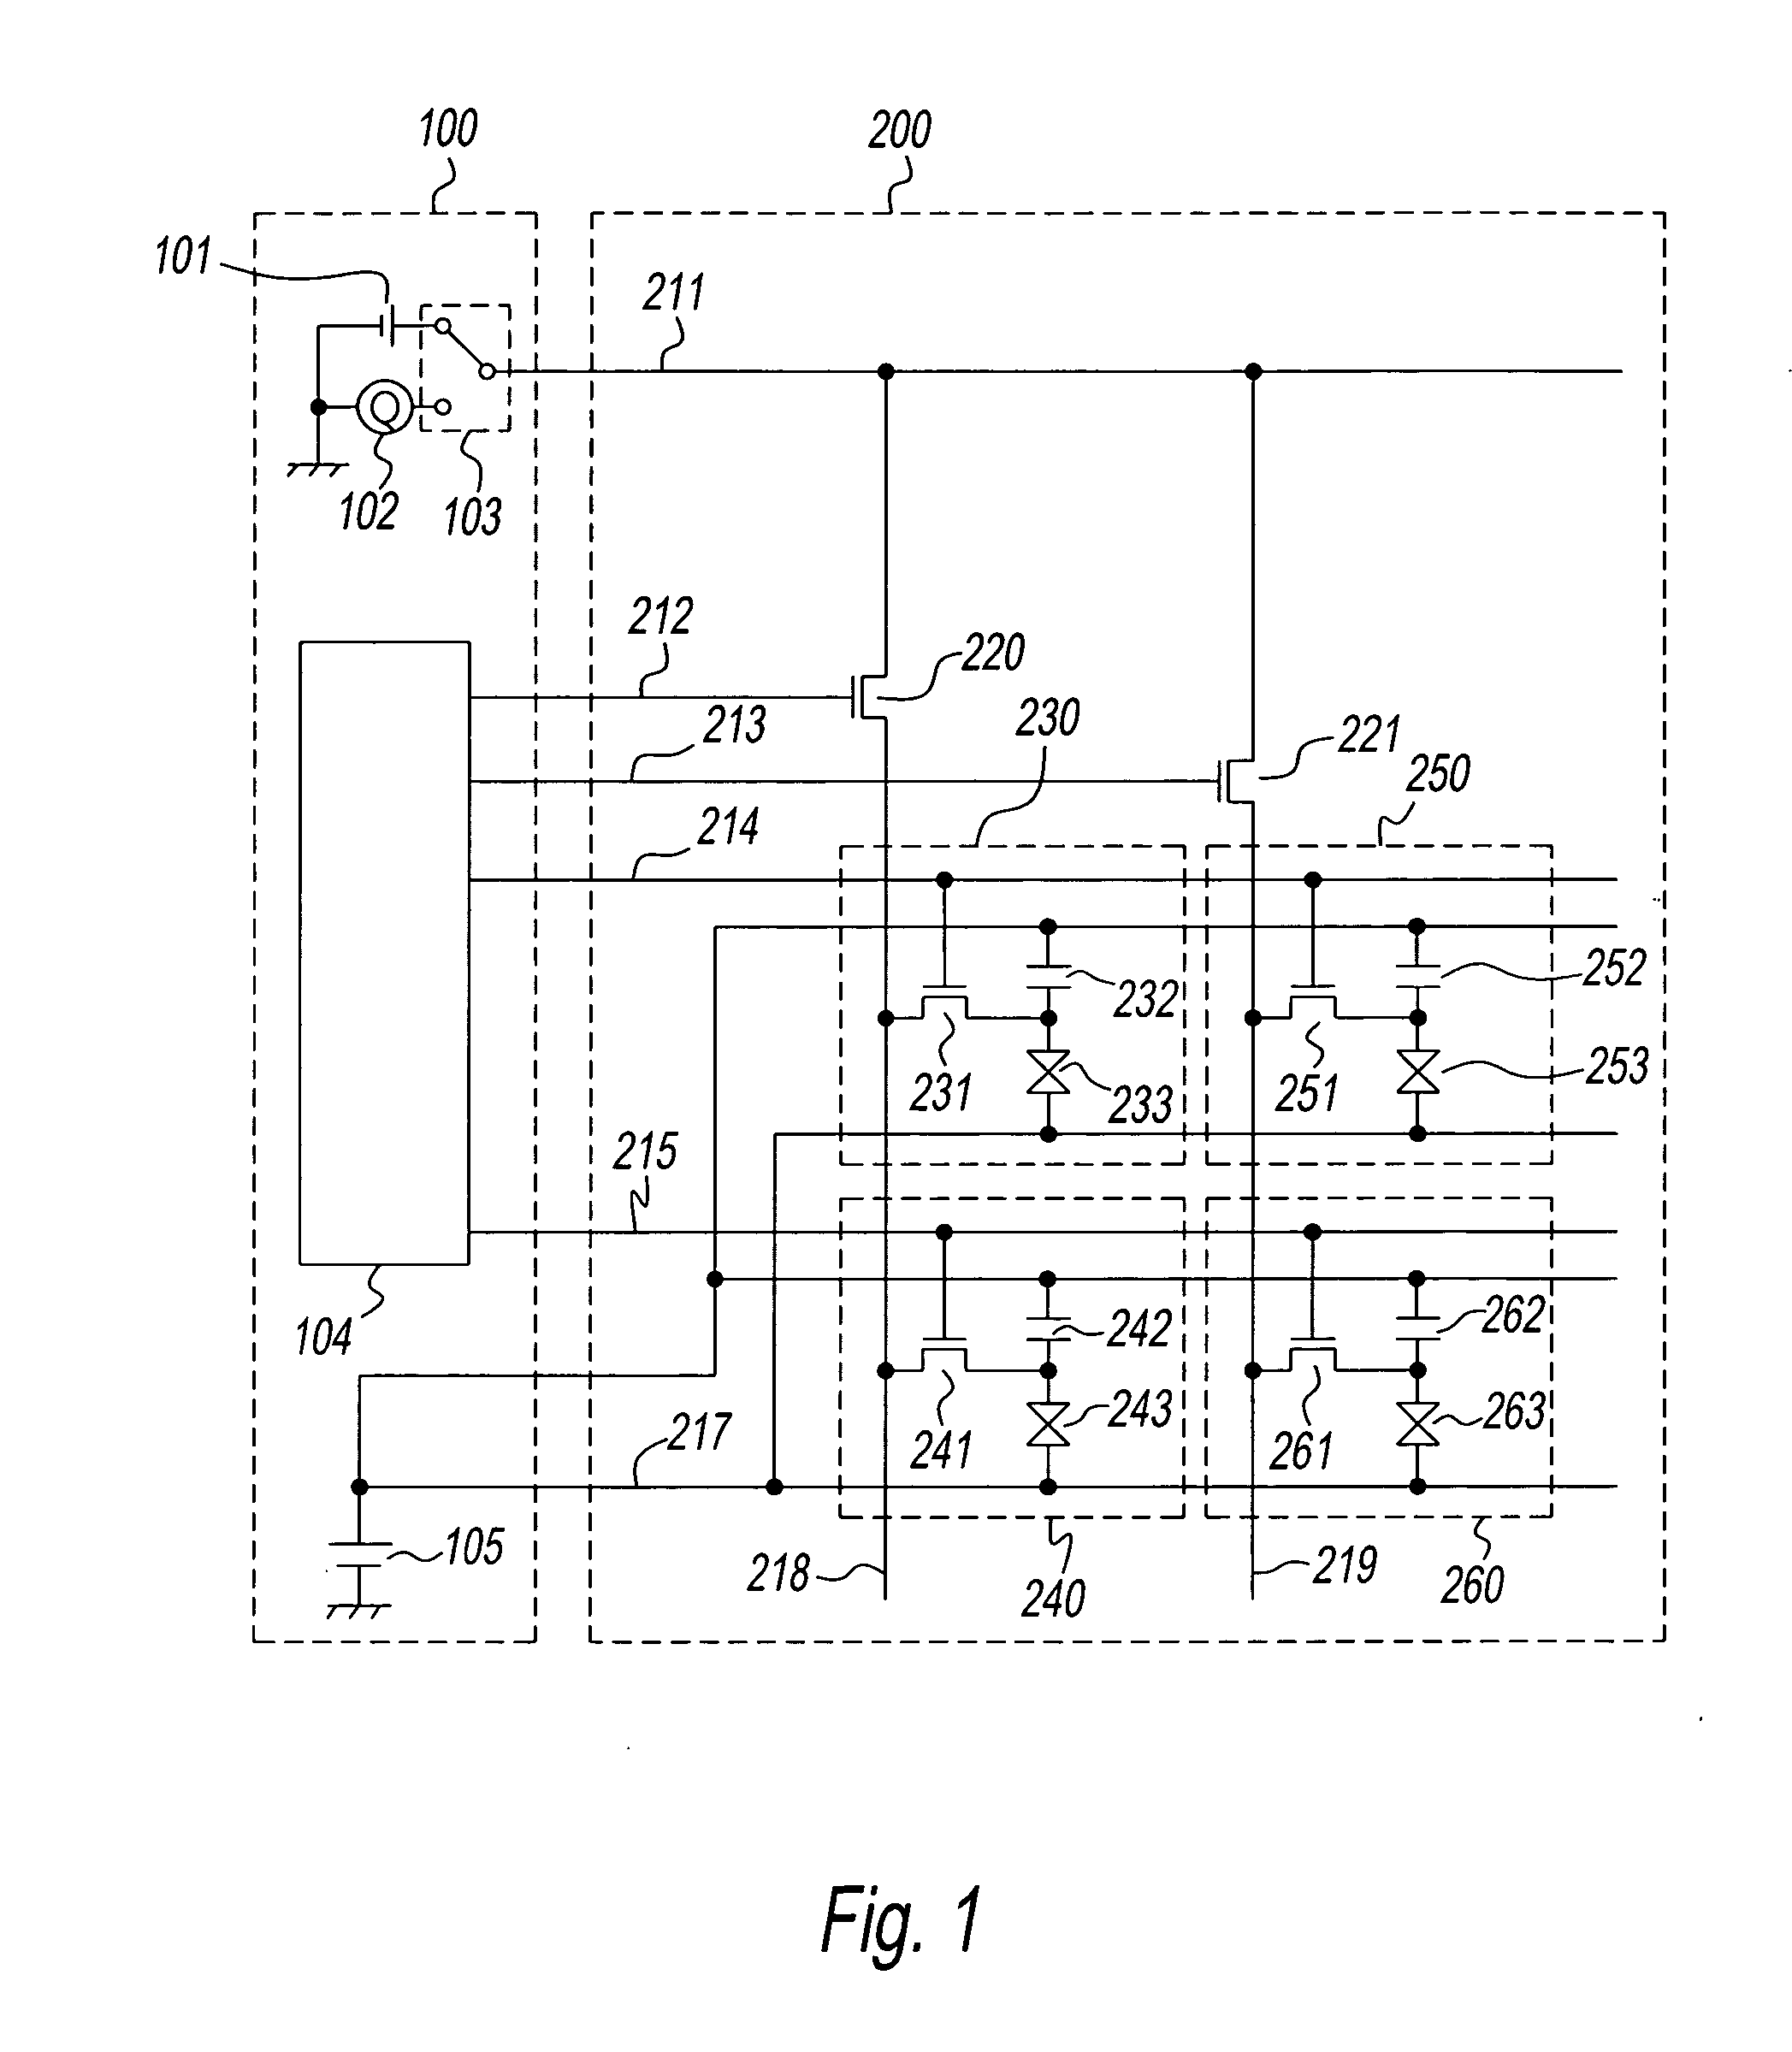 Method and apparatus for testing a TFT array for a liquid crystal panel